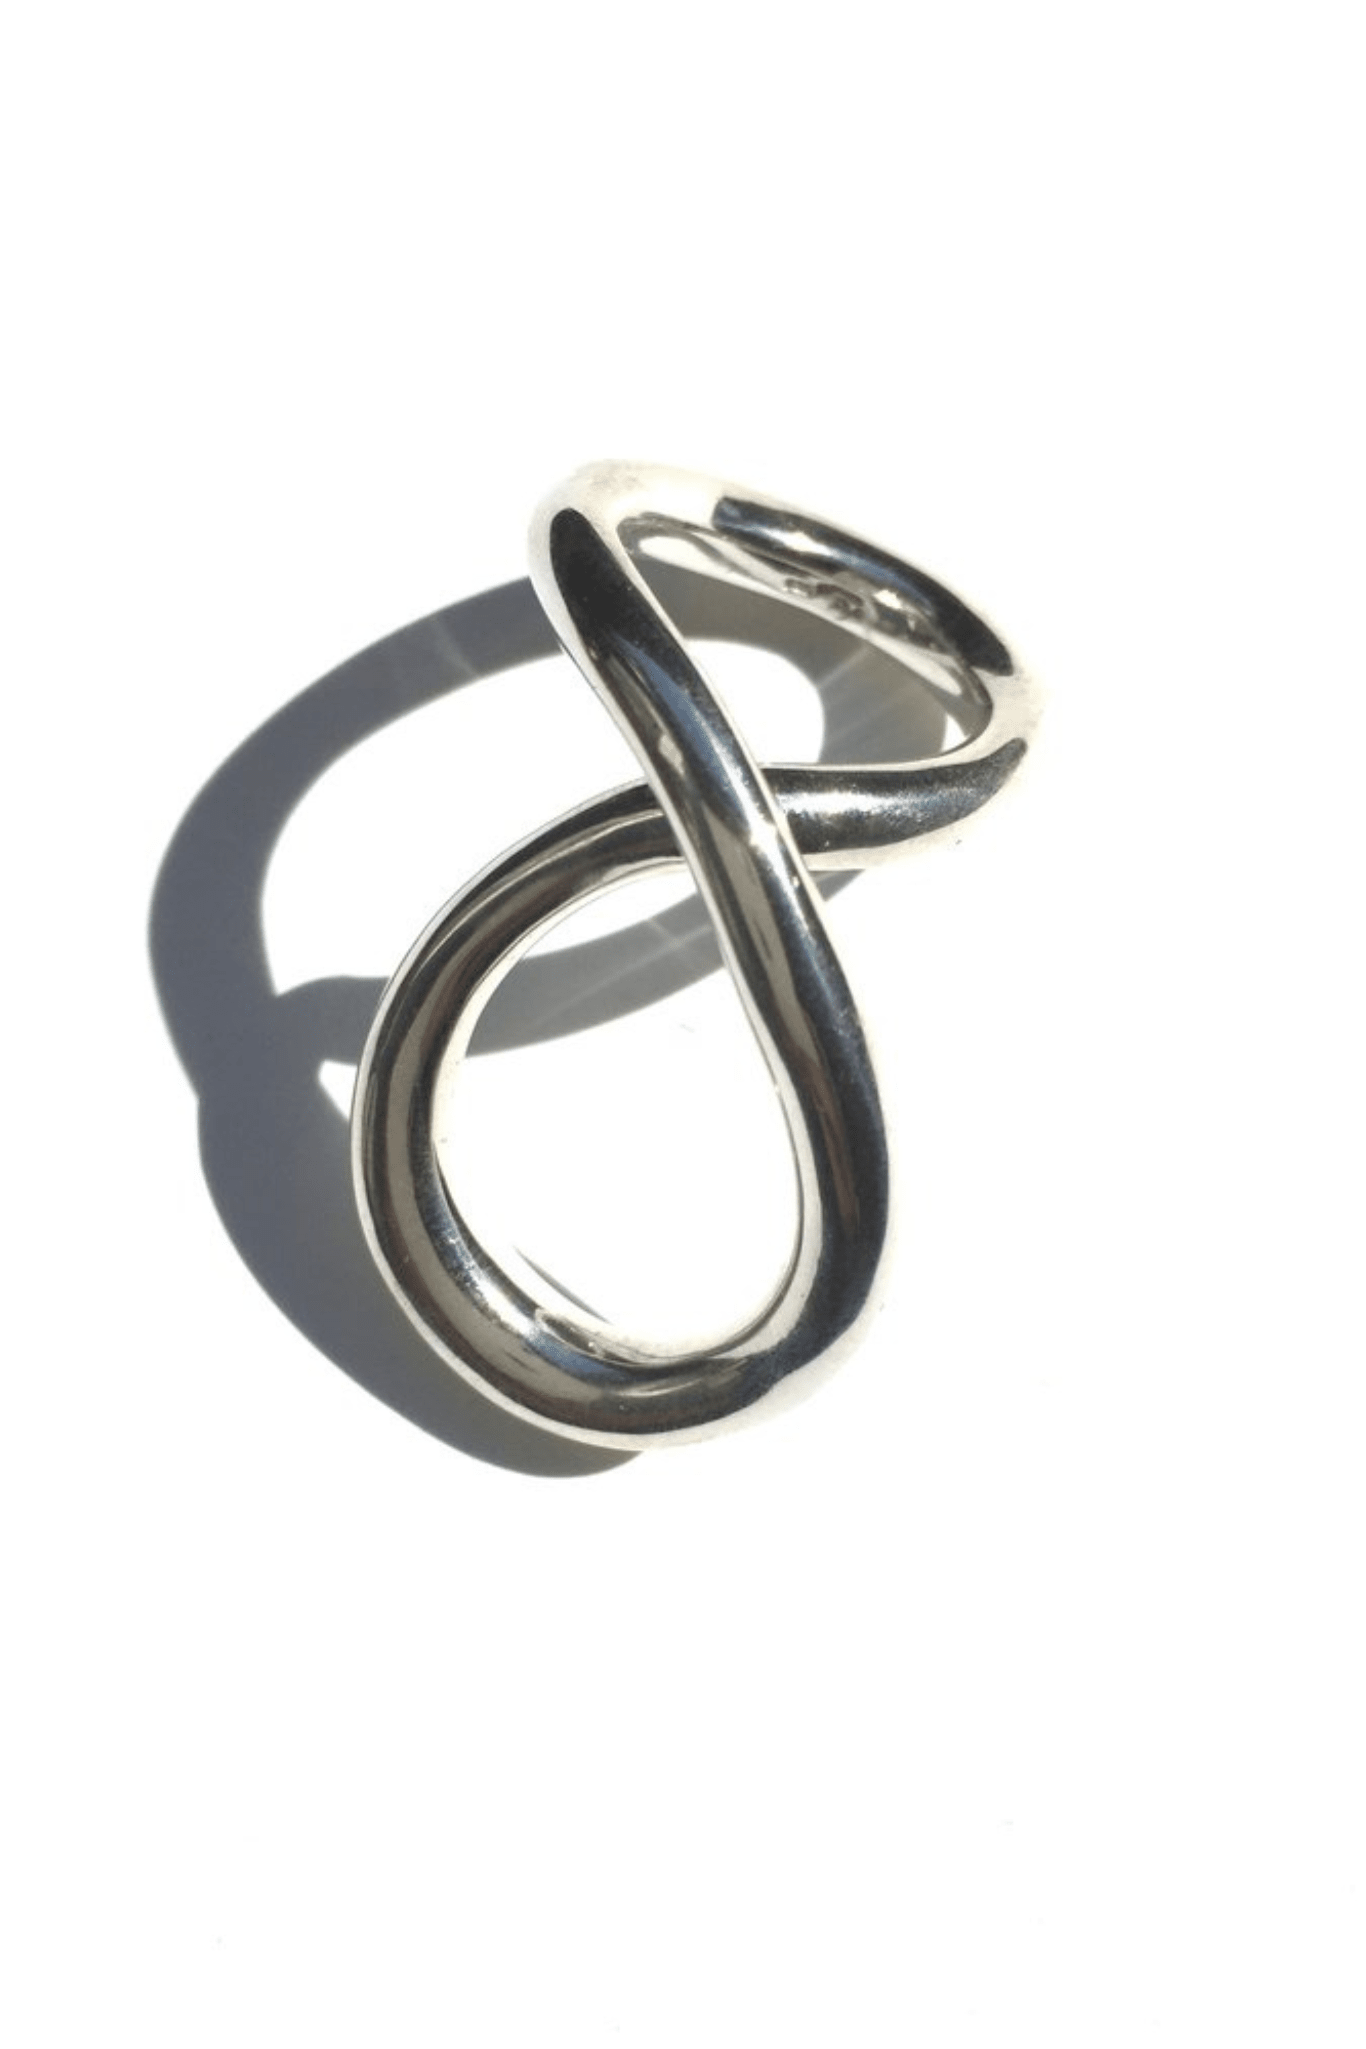 Jane D'Arensbourg Mobius 2 Ring - Silver